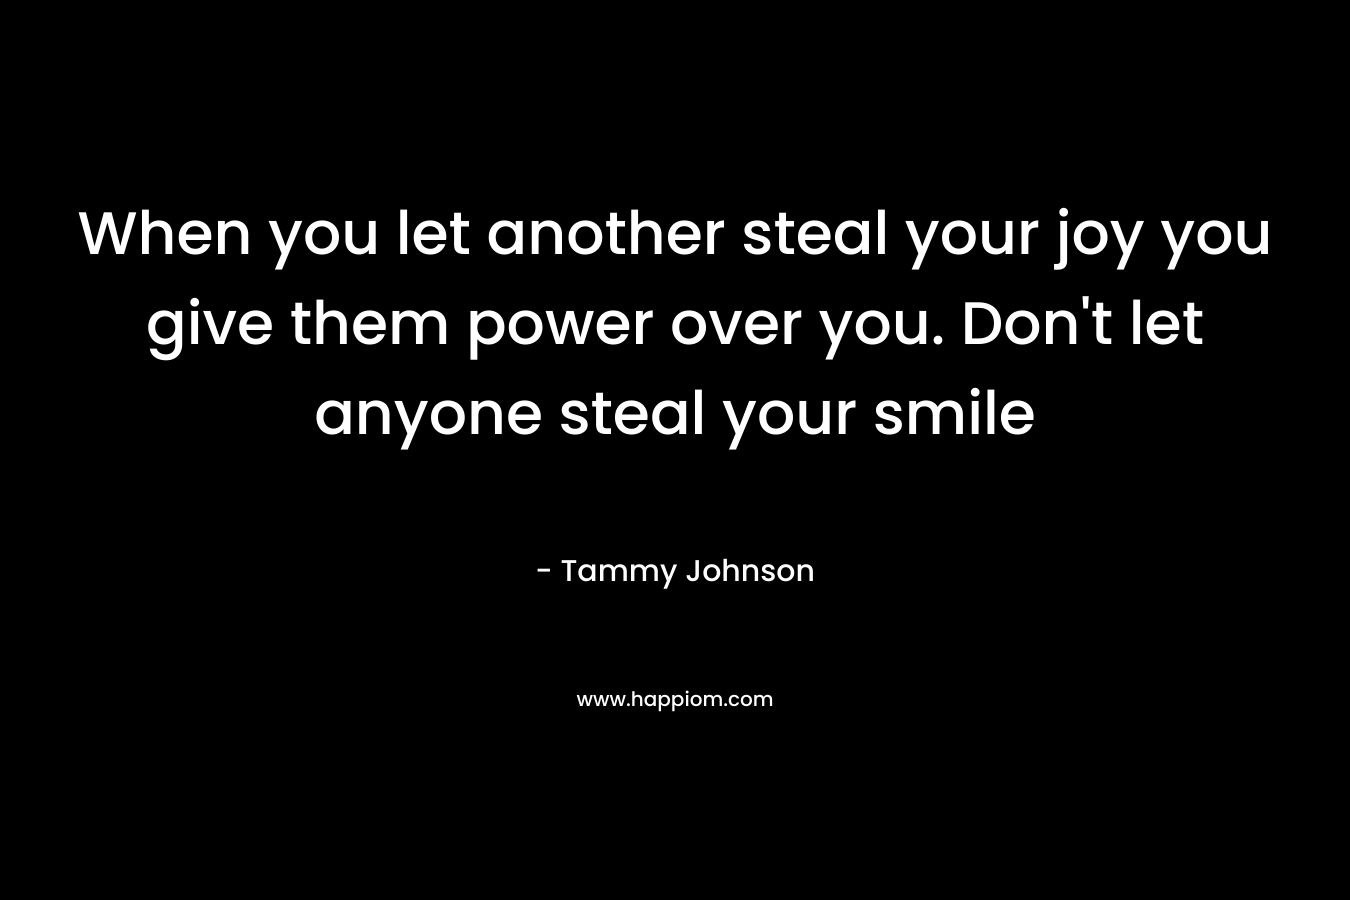 When you let another steal your joy you give them power over you. Don't let anyone steal your smile